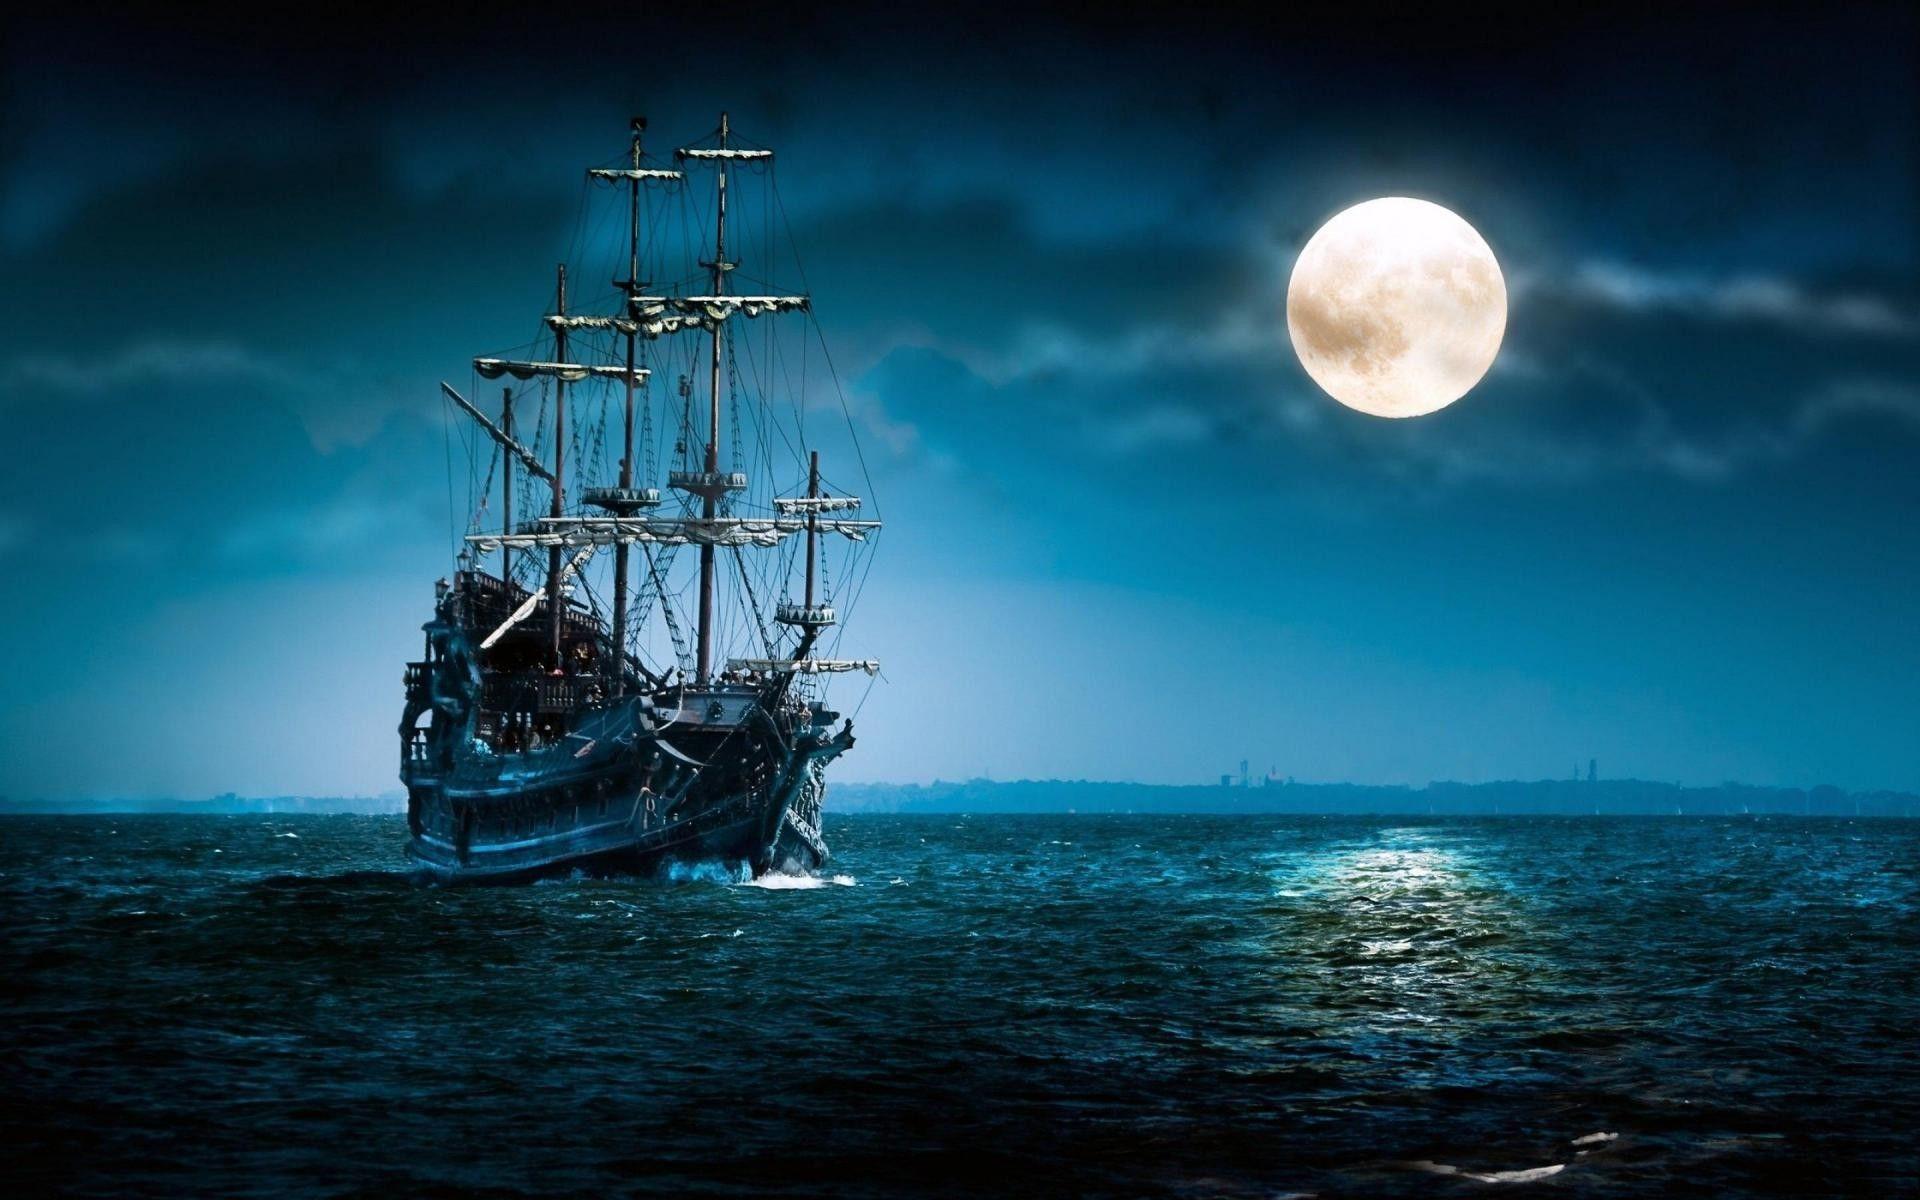 Black Pearl Ship Wallpapers - Top Free Black Pearl Ship Backgrounds